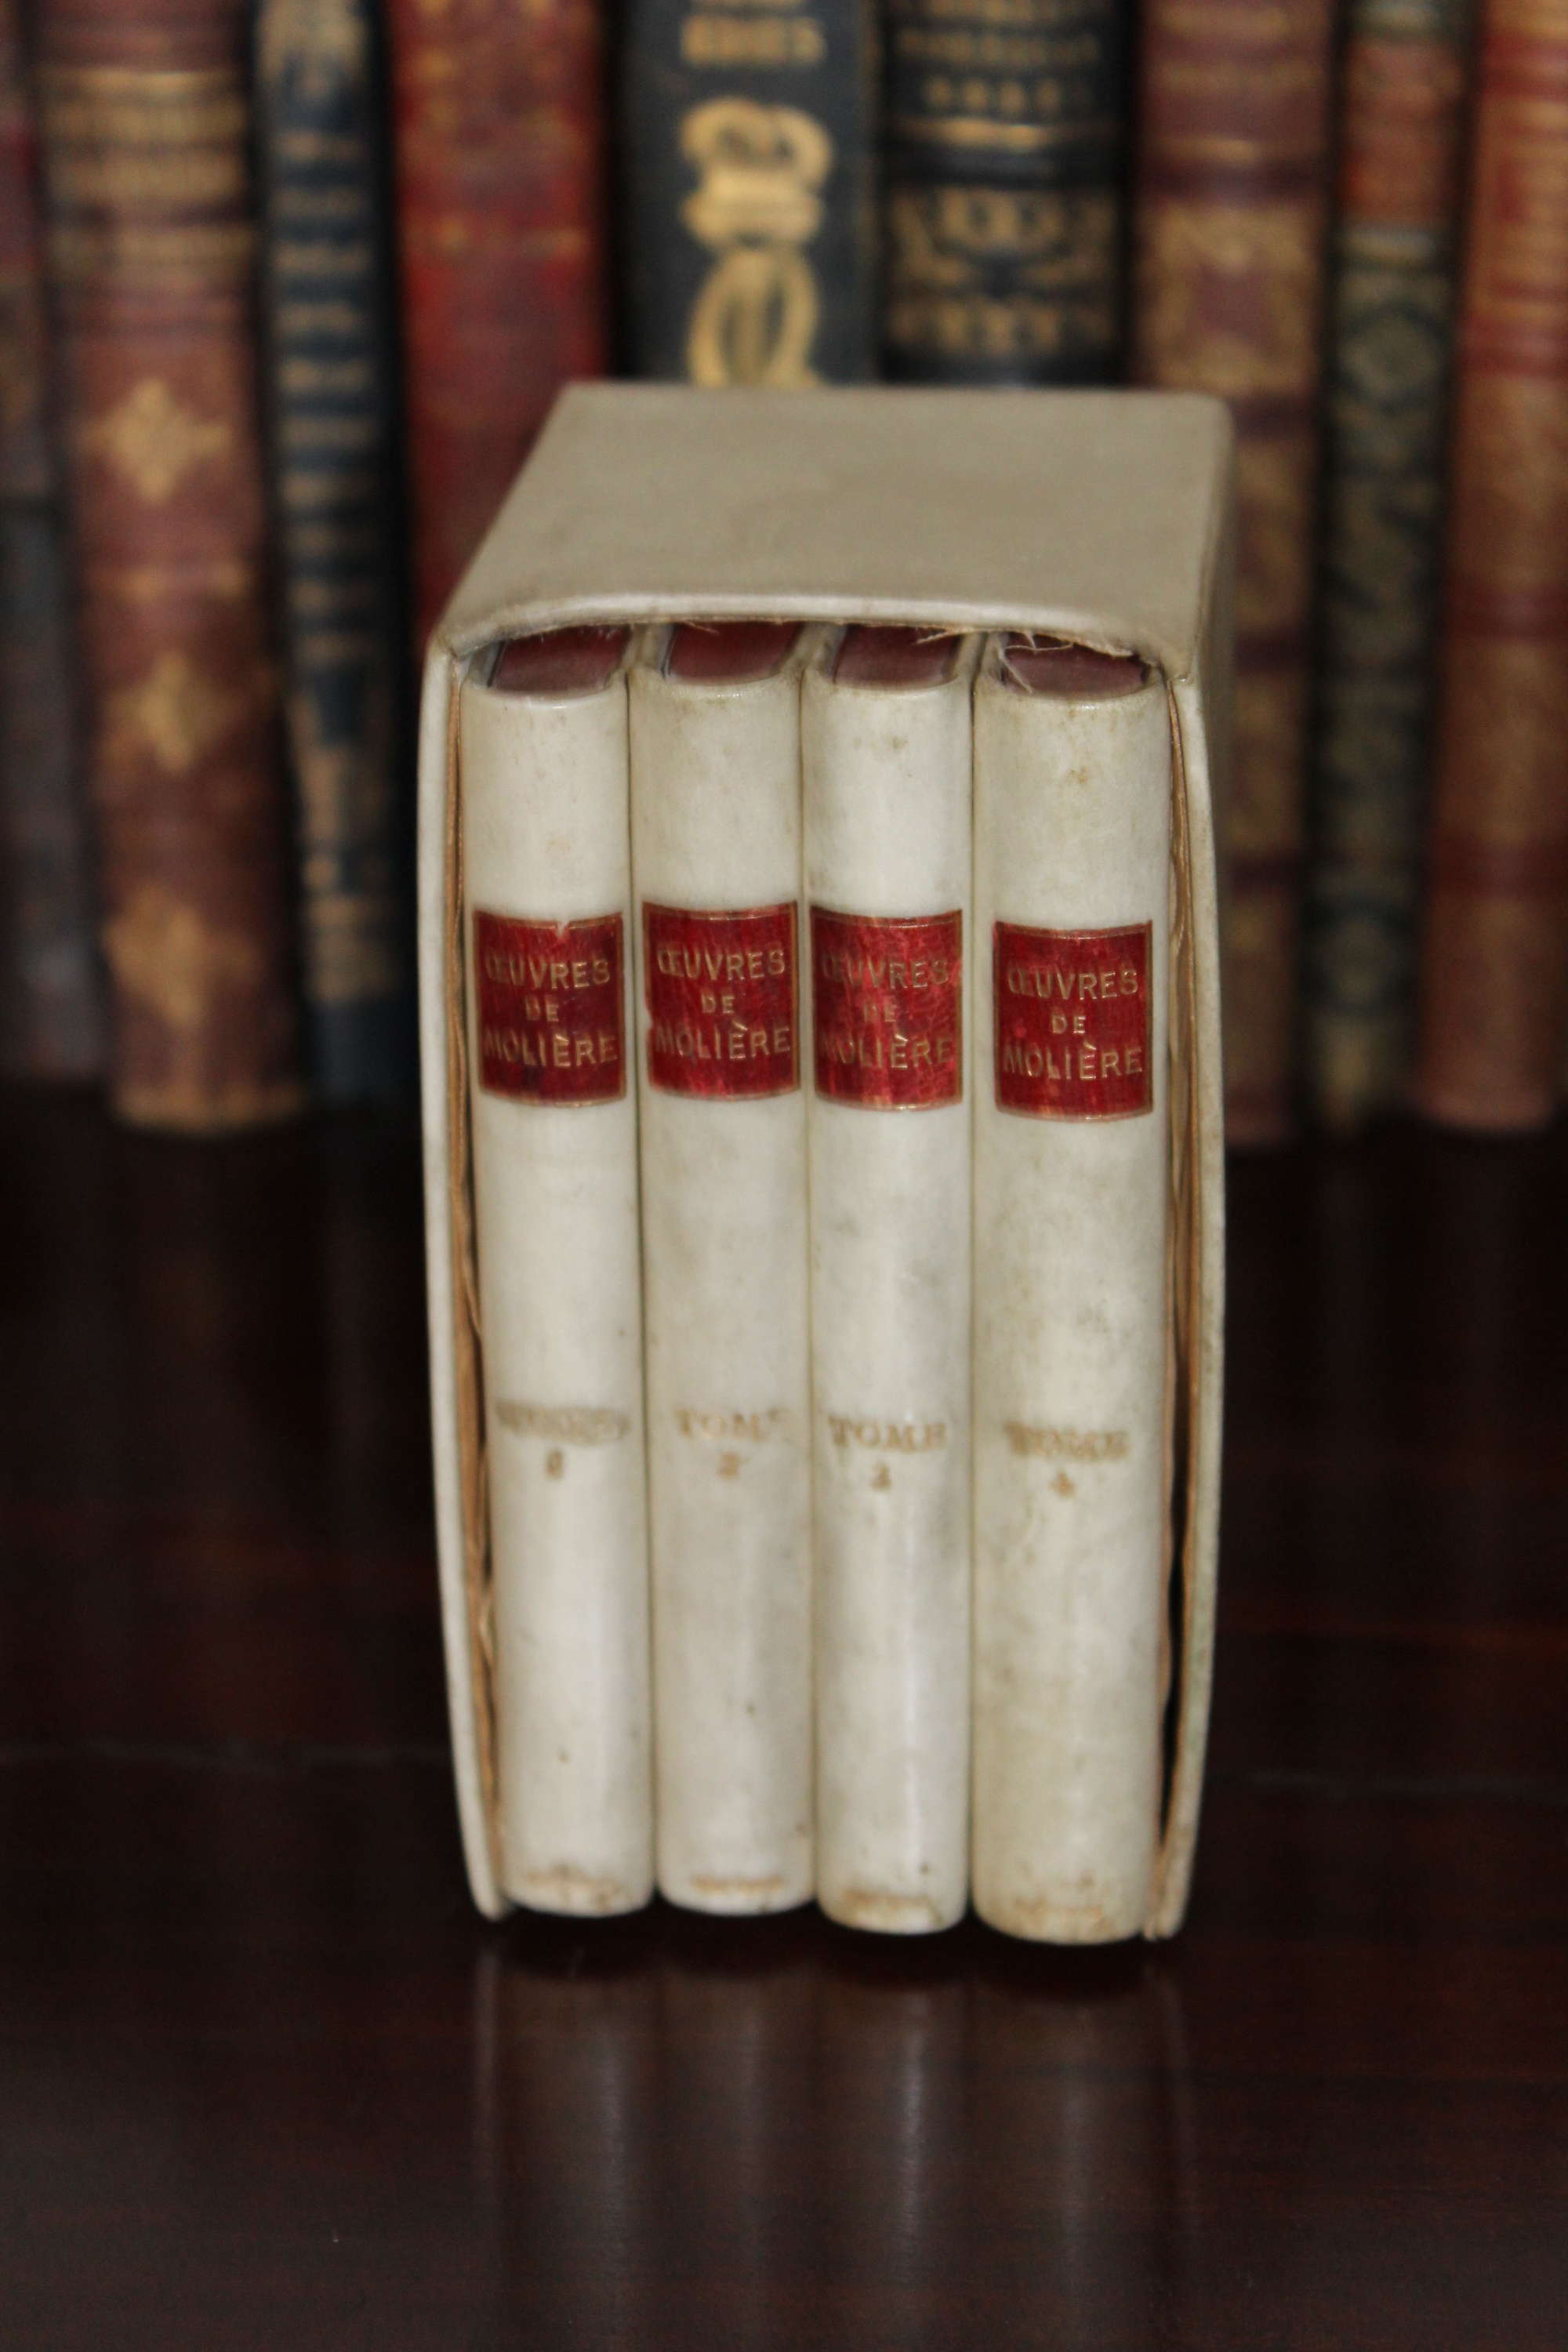 Set Of Vellum Covered Books By Jean Baptiste Poquelin Known By His Stage Name As Moliere